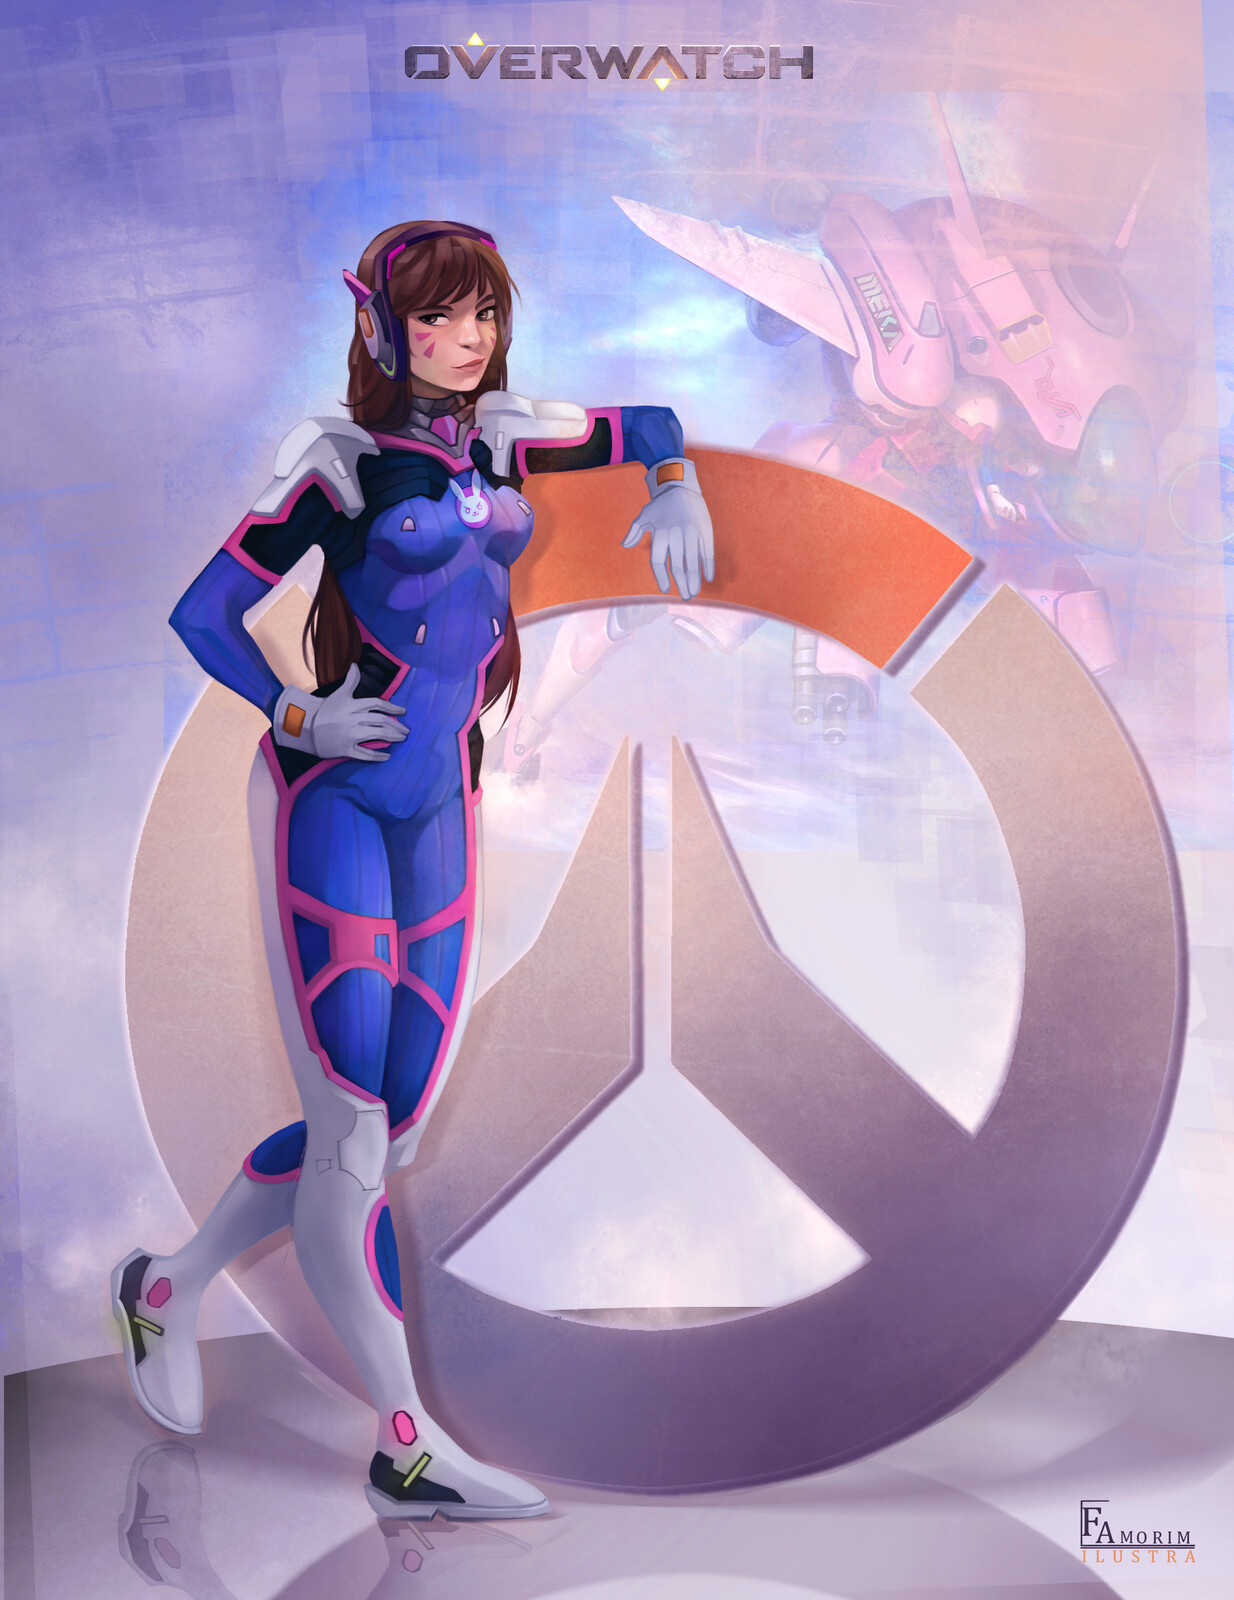 Character DVa the game Overwatch